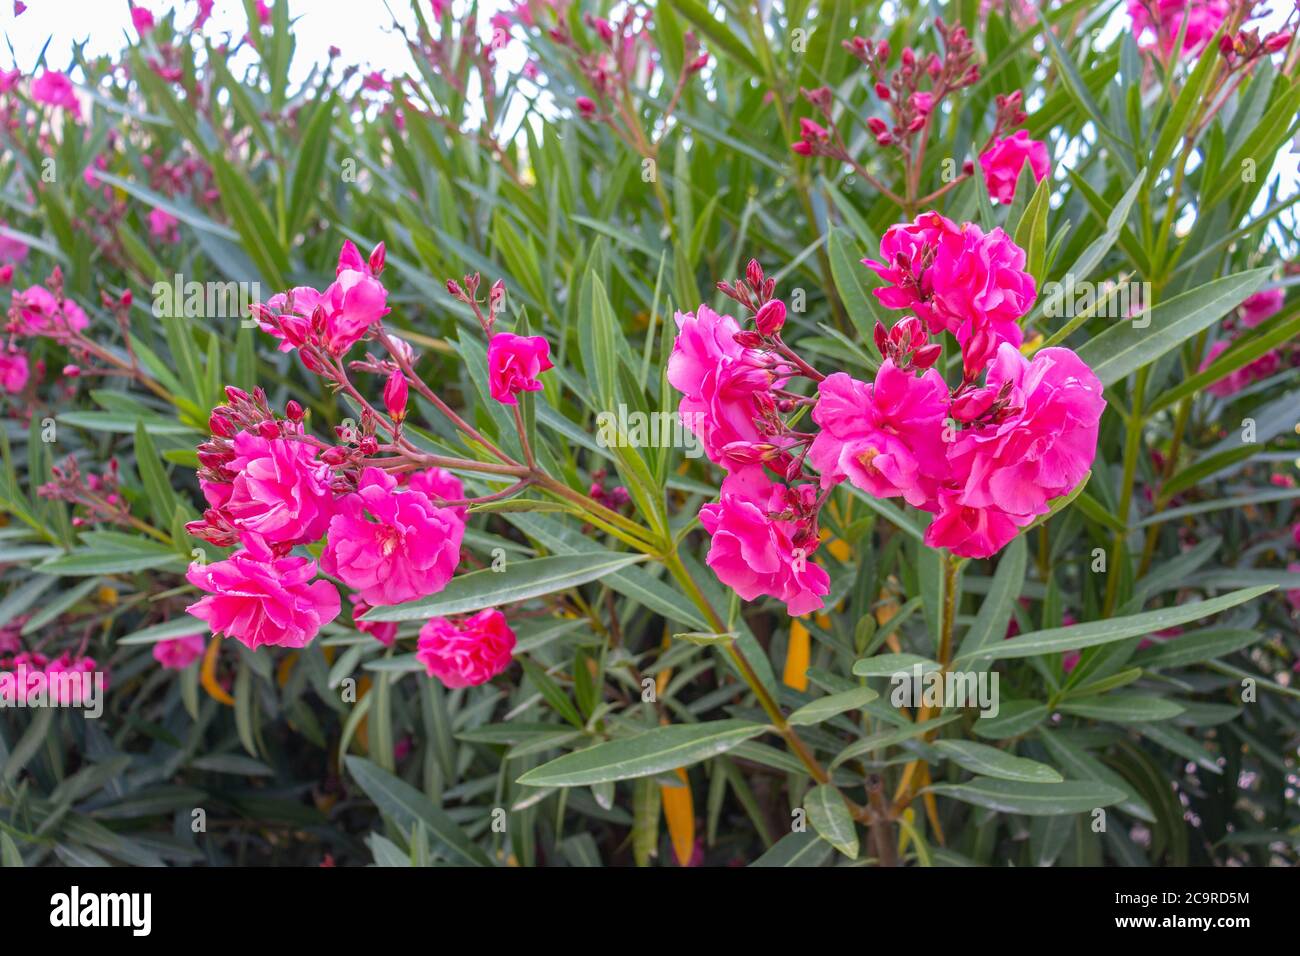 Nerium oleander known as nerium or oleander a shrub or small tree in the dogbane family Apocynaceae Stock Photo